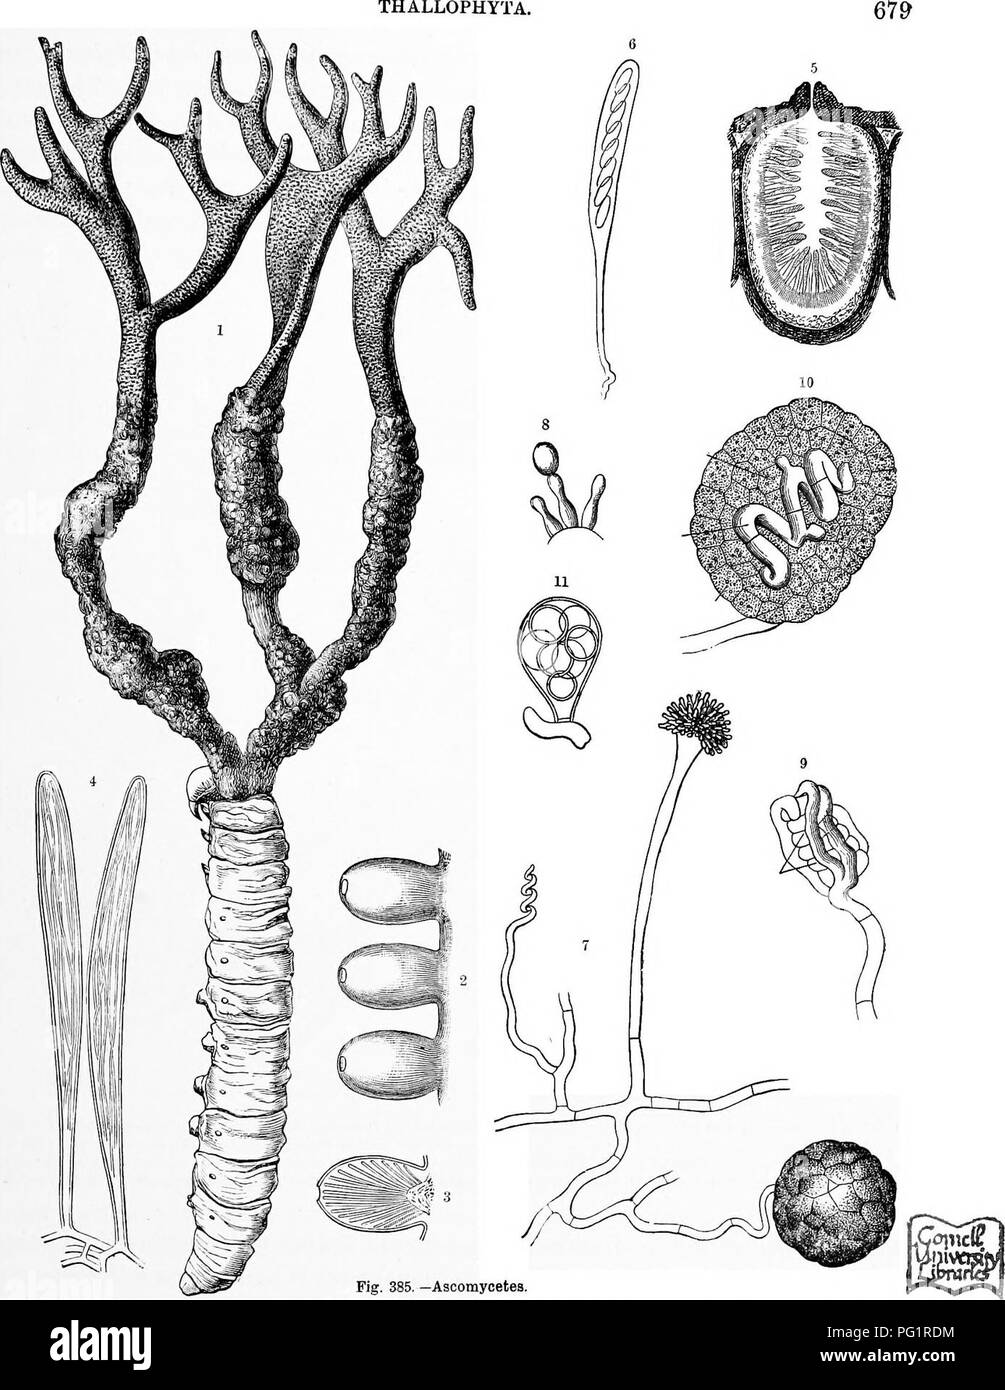 . The natural history of plants, their forms, growth, reproduction, and distribution;. Botany. THALLOPHYTA,. 1 CordycepB Taylori, a pyrenomycetous Fiirgu which attacks caterpillars; the branched antler-like stroma has developed rfrom the sclerotlum, and its lower warted portion bears the perithecia. 2 Three perithecia; enlarged. 3 a perithecium in section. * Two asci containing filamentous spores. » Vertical section of a perithecium of Xylaria Hypoxylon. 6 Ascus of same. &quot;^ Mycelium of Eurotium. bearing a conidial hypha (to riglit, above), a commencing fruit (to left), and a ripe ascus-fr Stock Photo